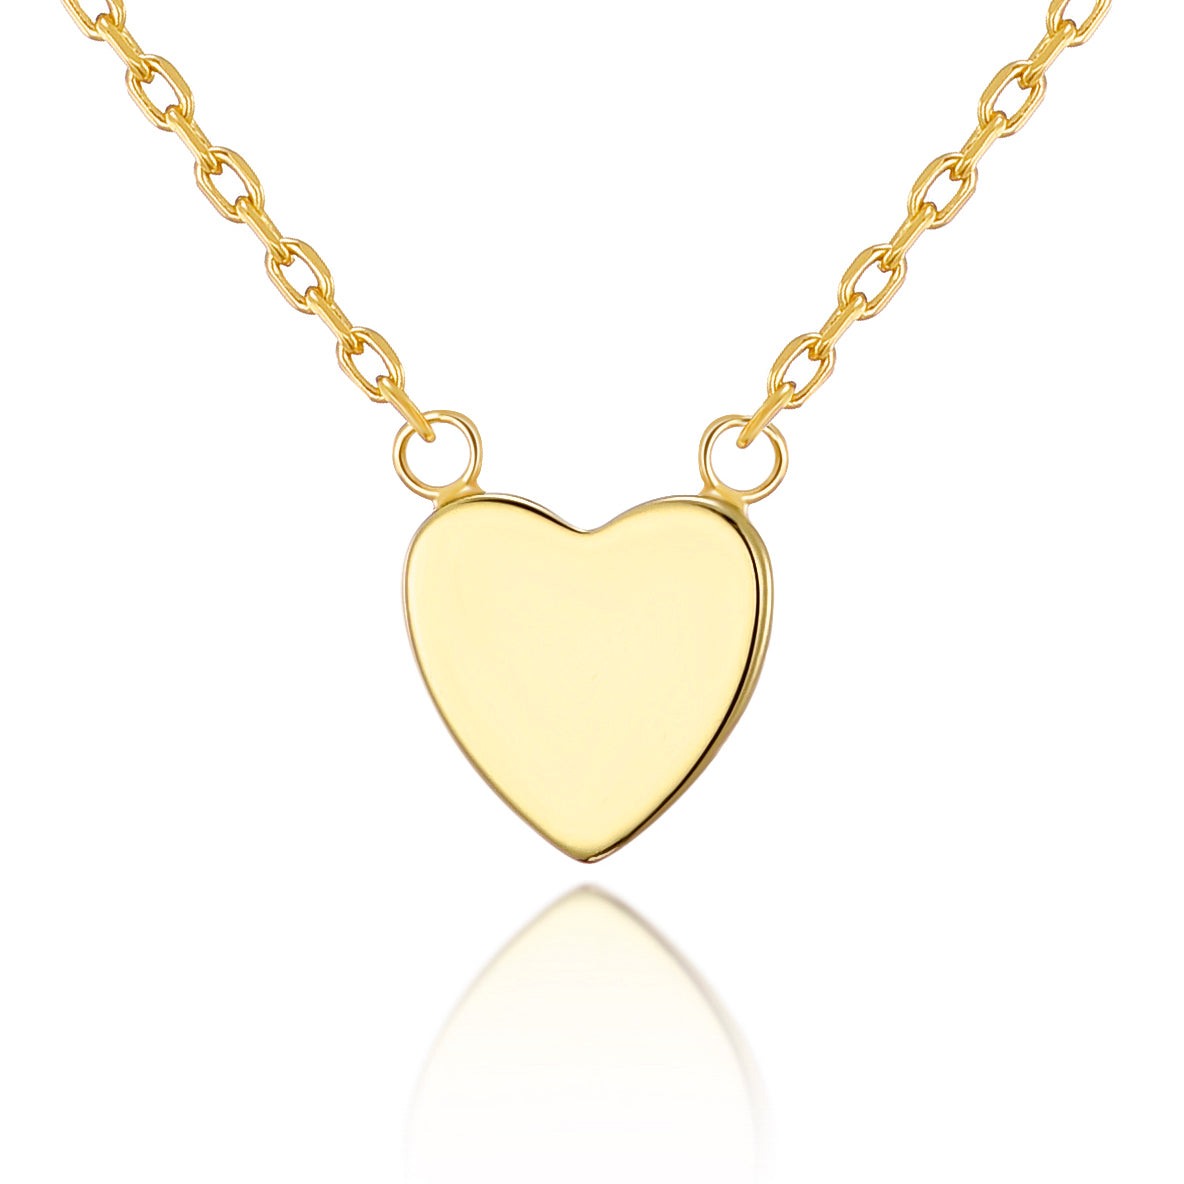 Gold Plated Sister Heart Necklace with Quote Card